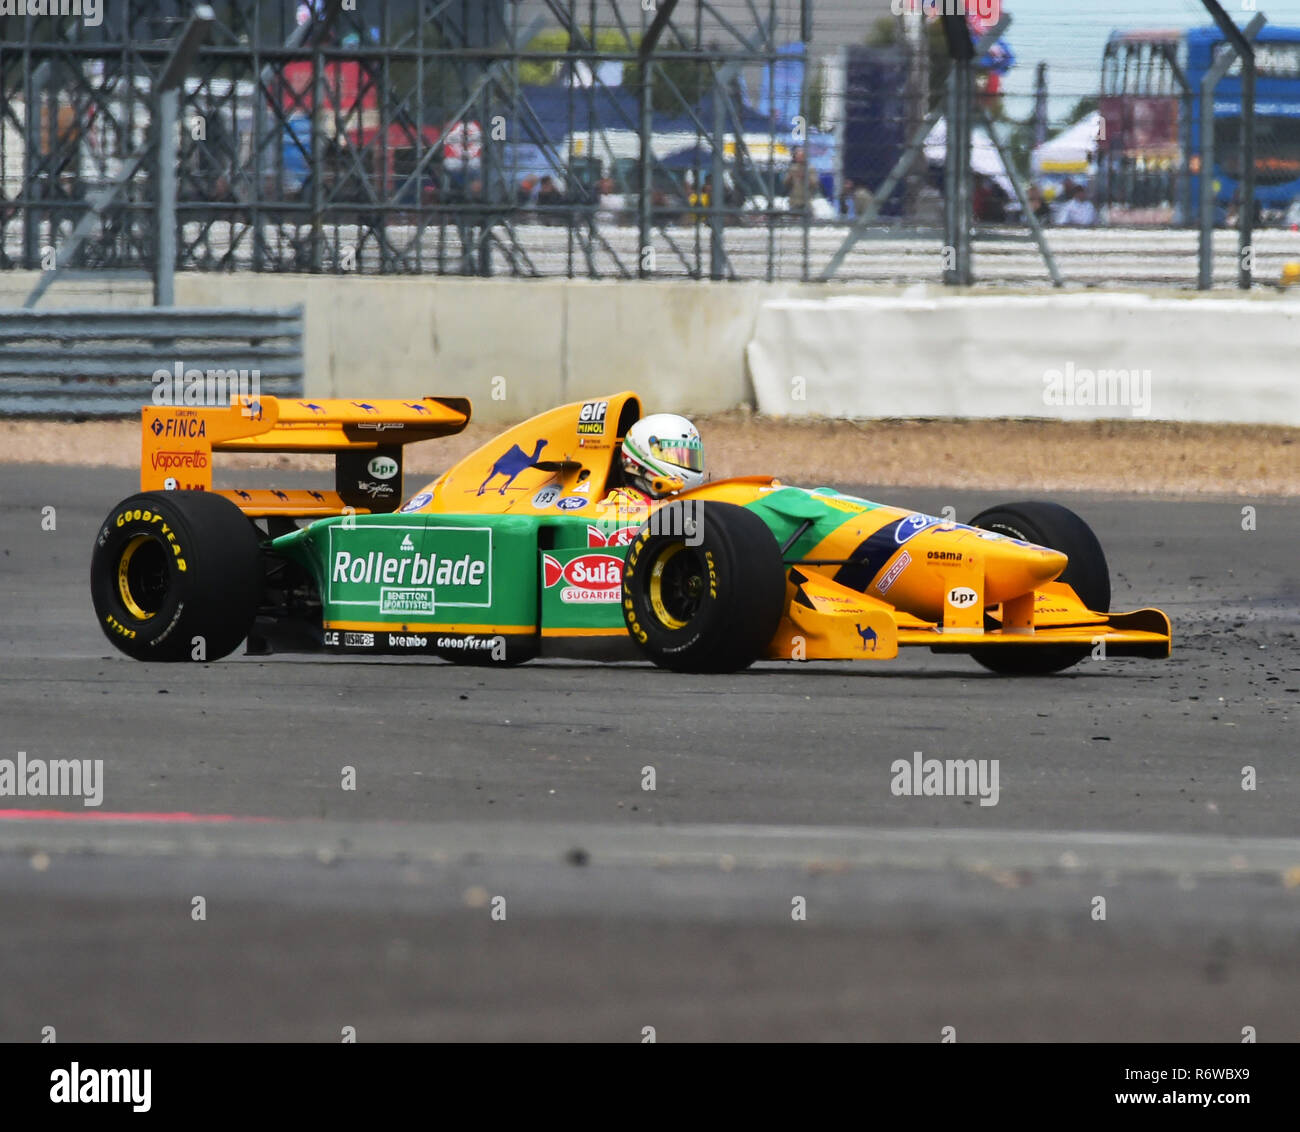 Benetton Formula One High Resolution Stock Photography and Images - Alamy